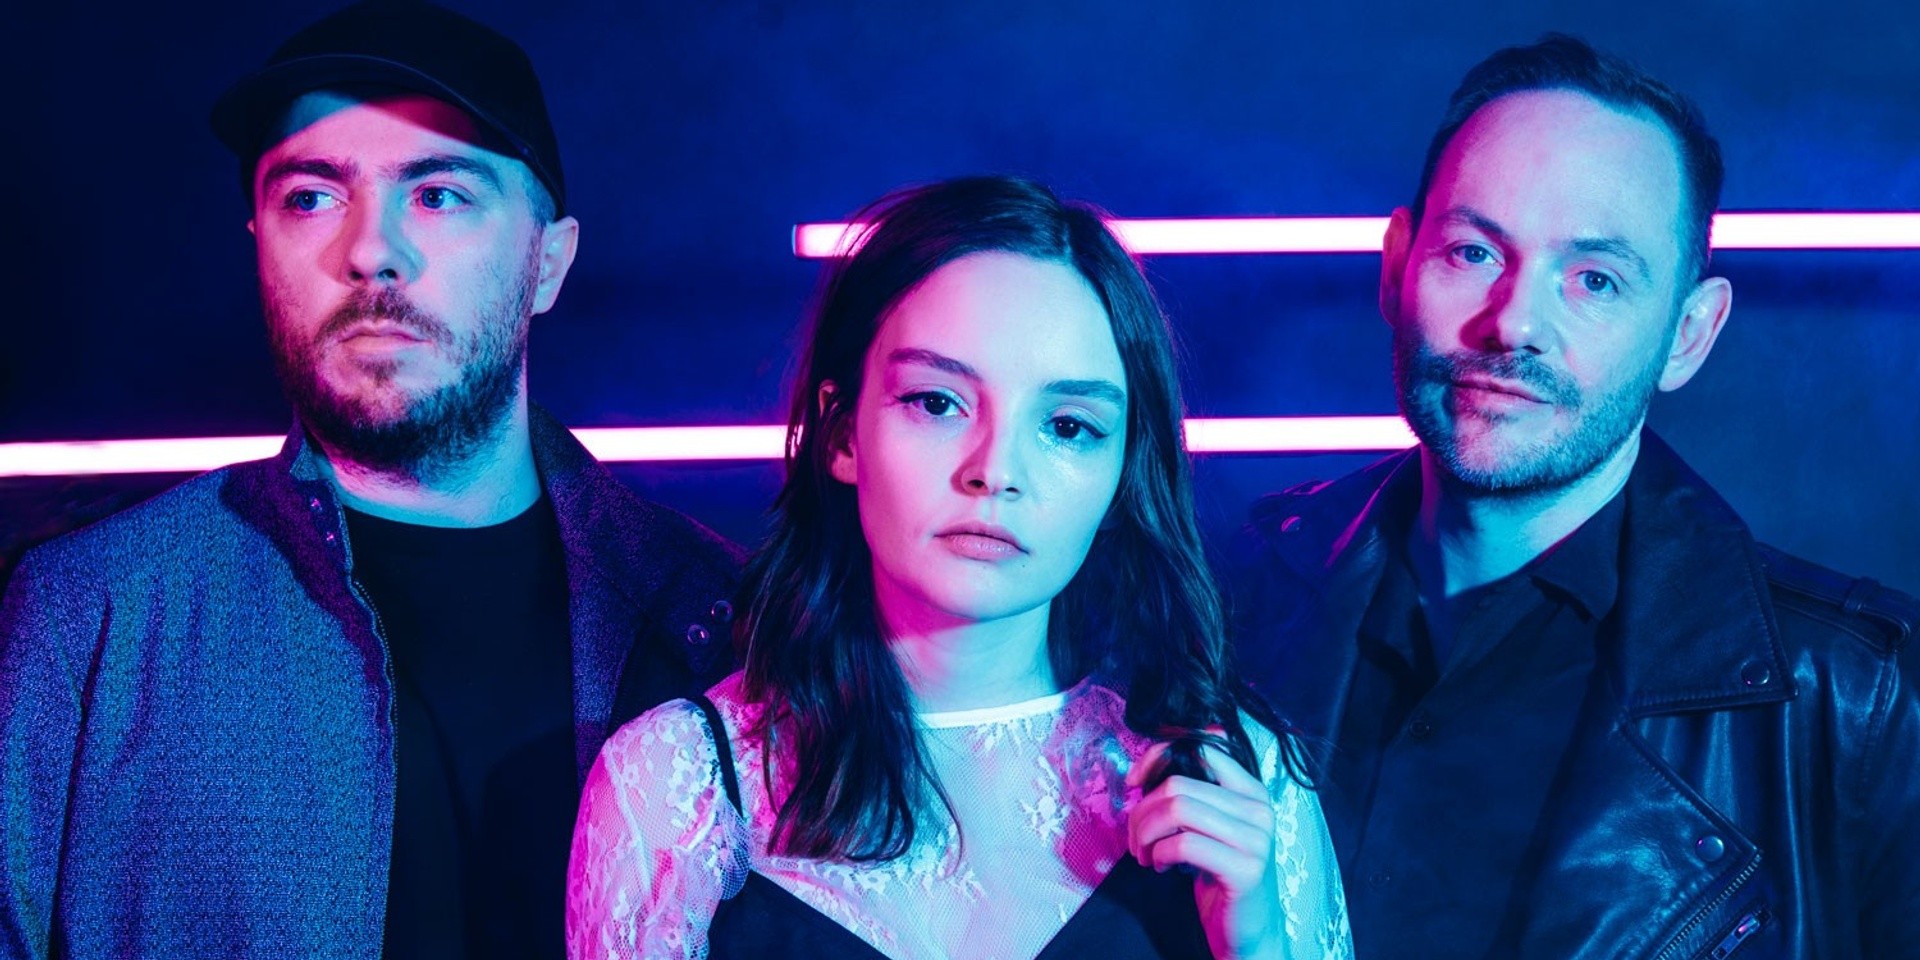 CHVRCHES announce new EP due for release on Friday 